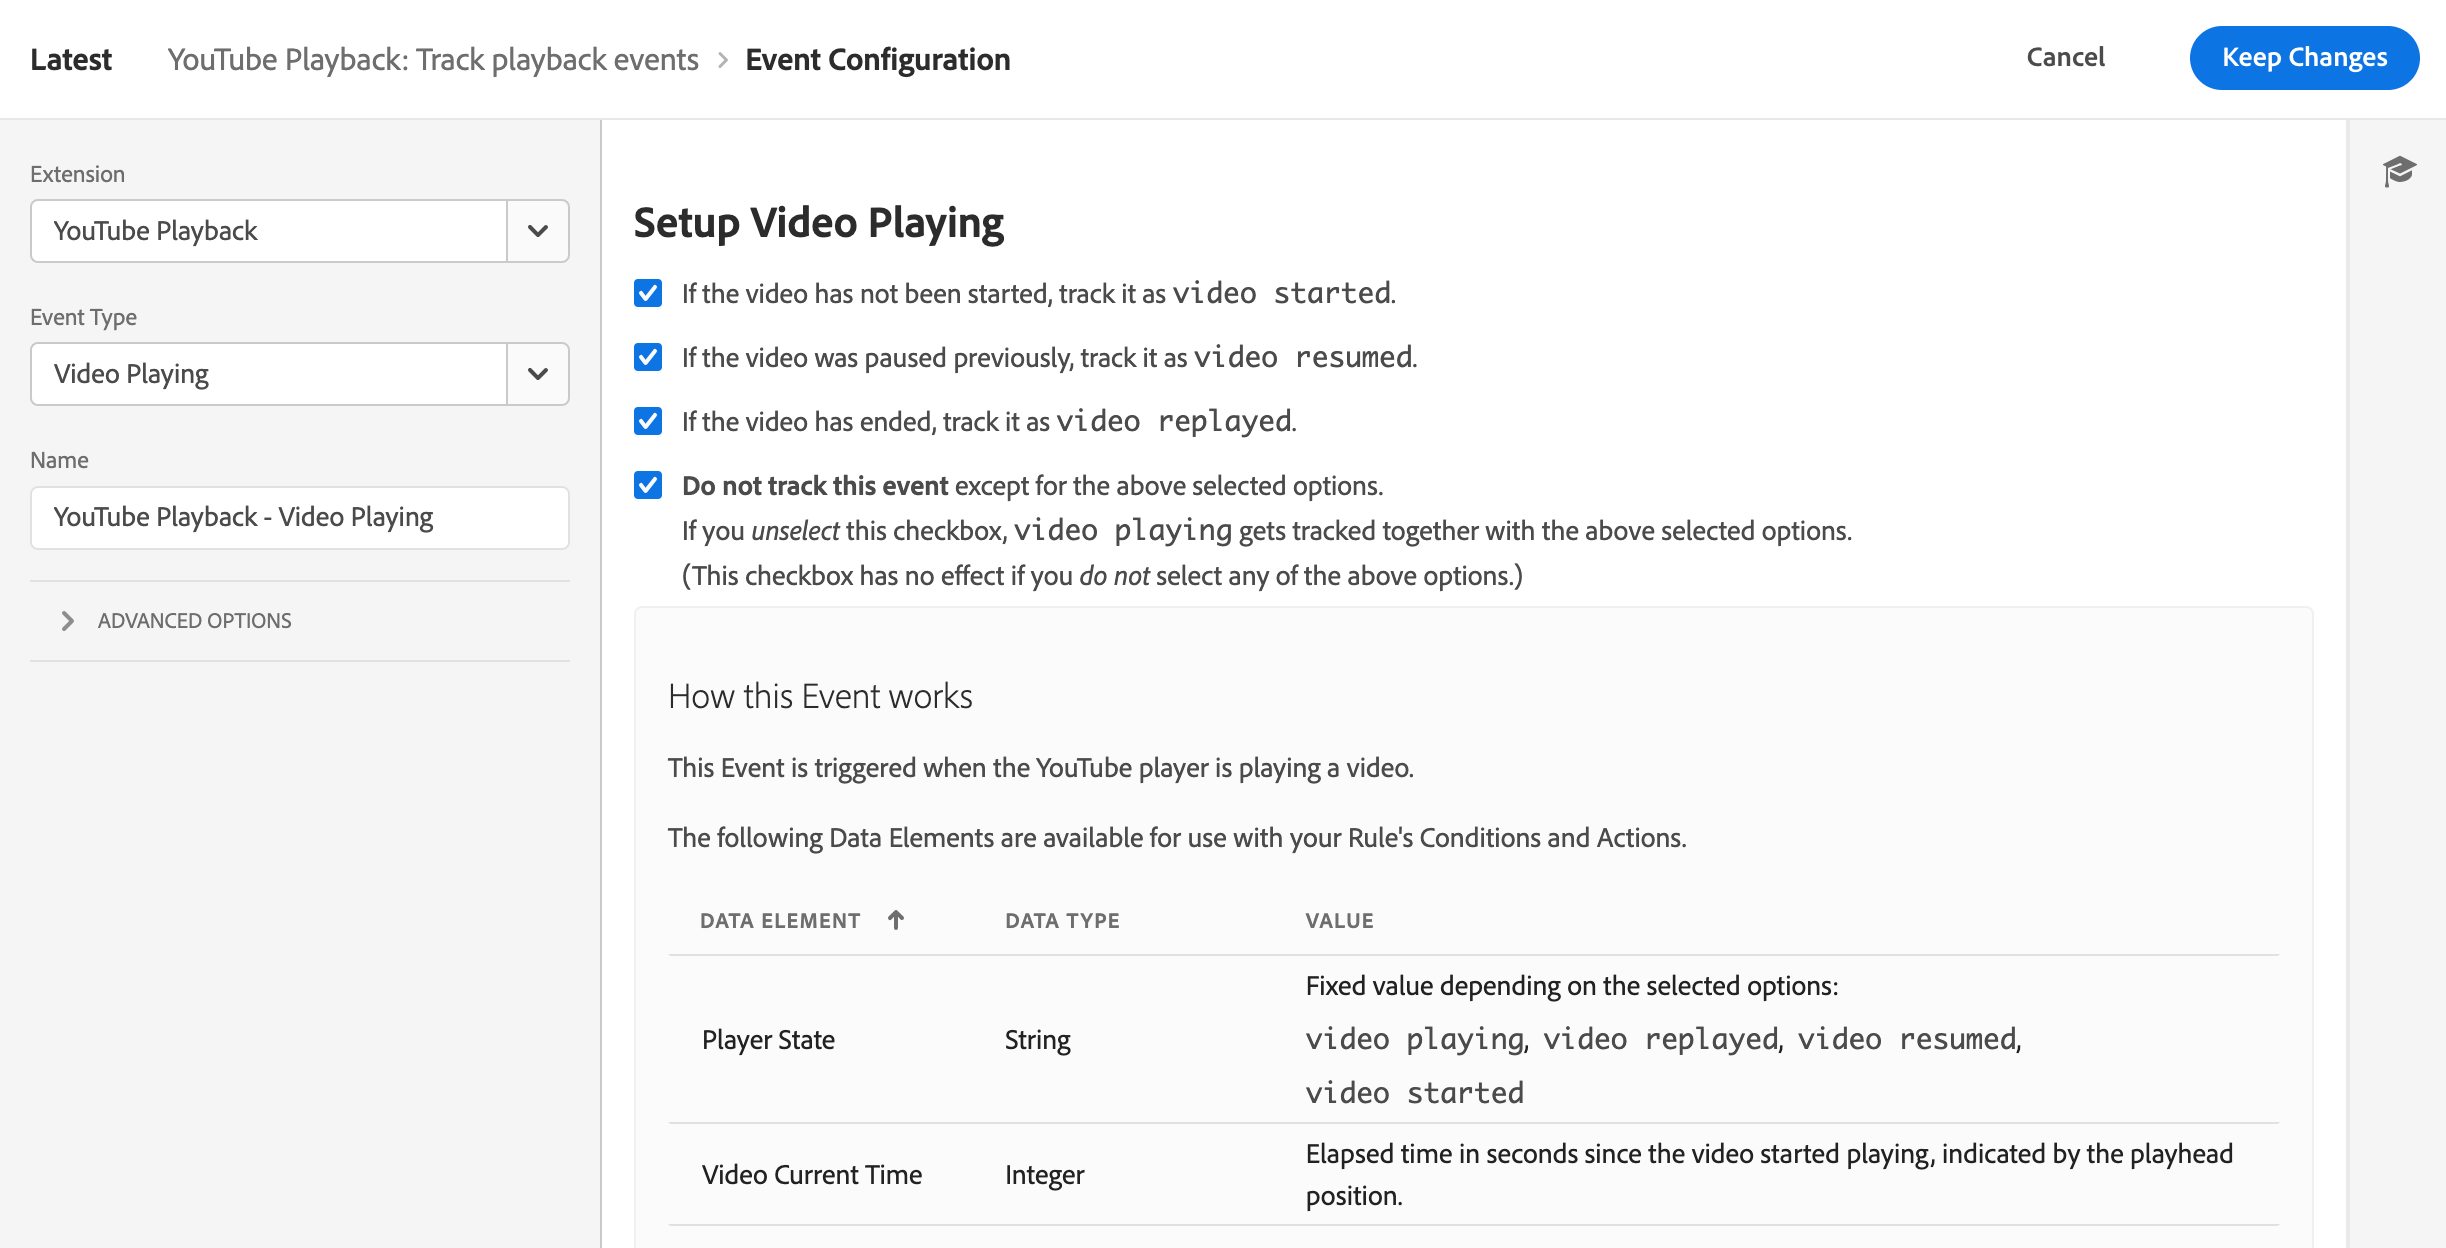 [Rule: Track playback events | Event: YouTube Playback > Video Playing]